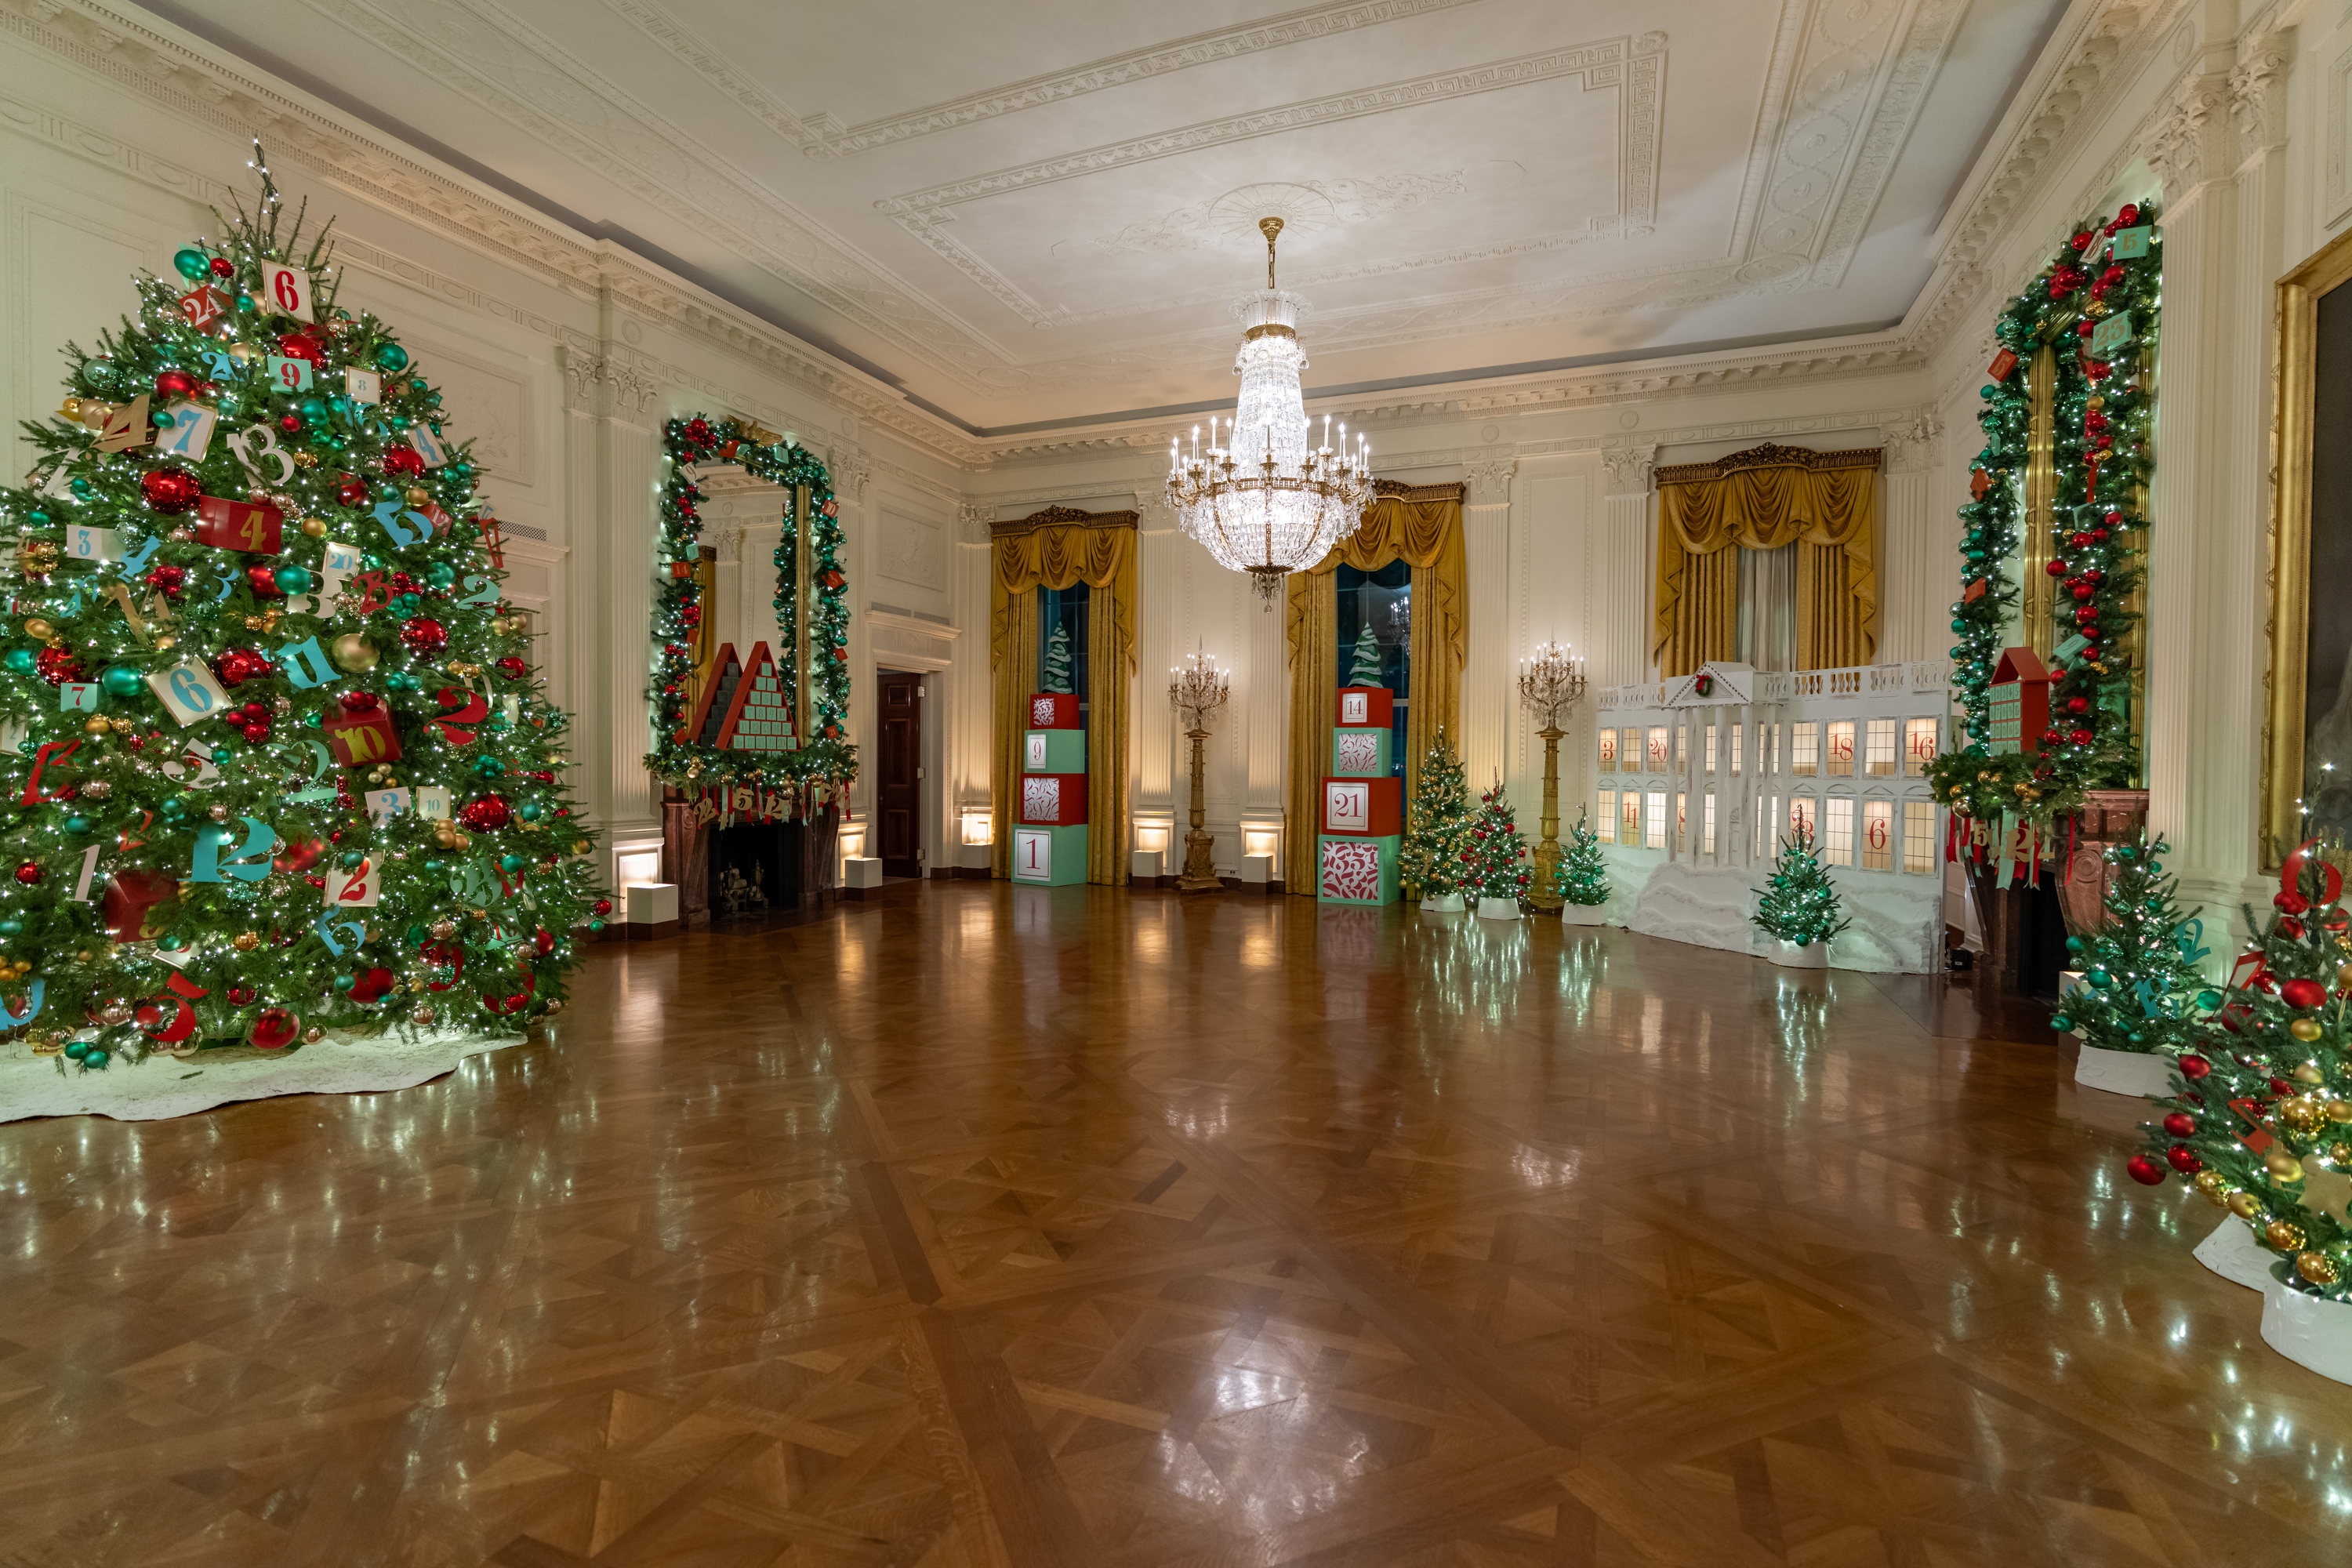 The East Room Christmas Decorations